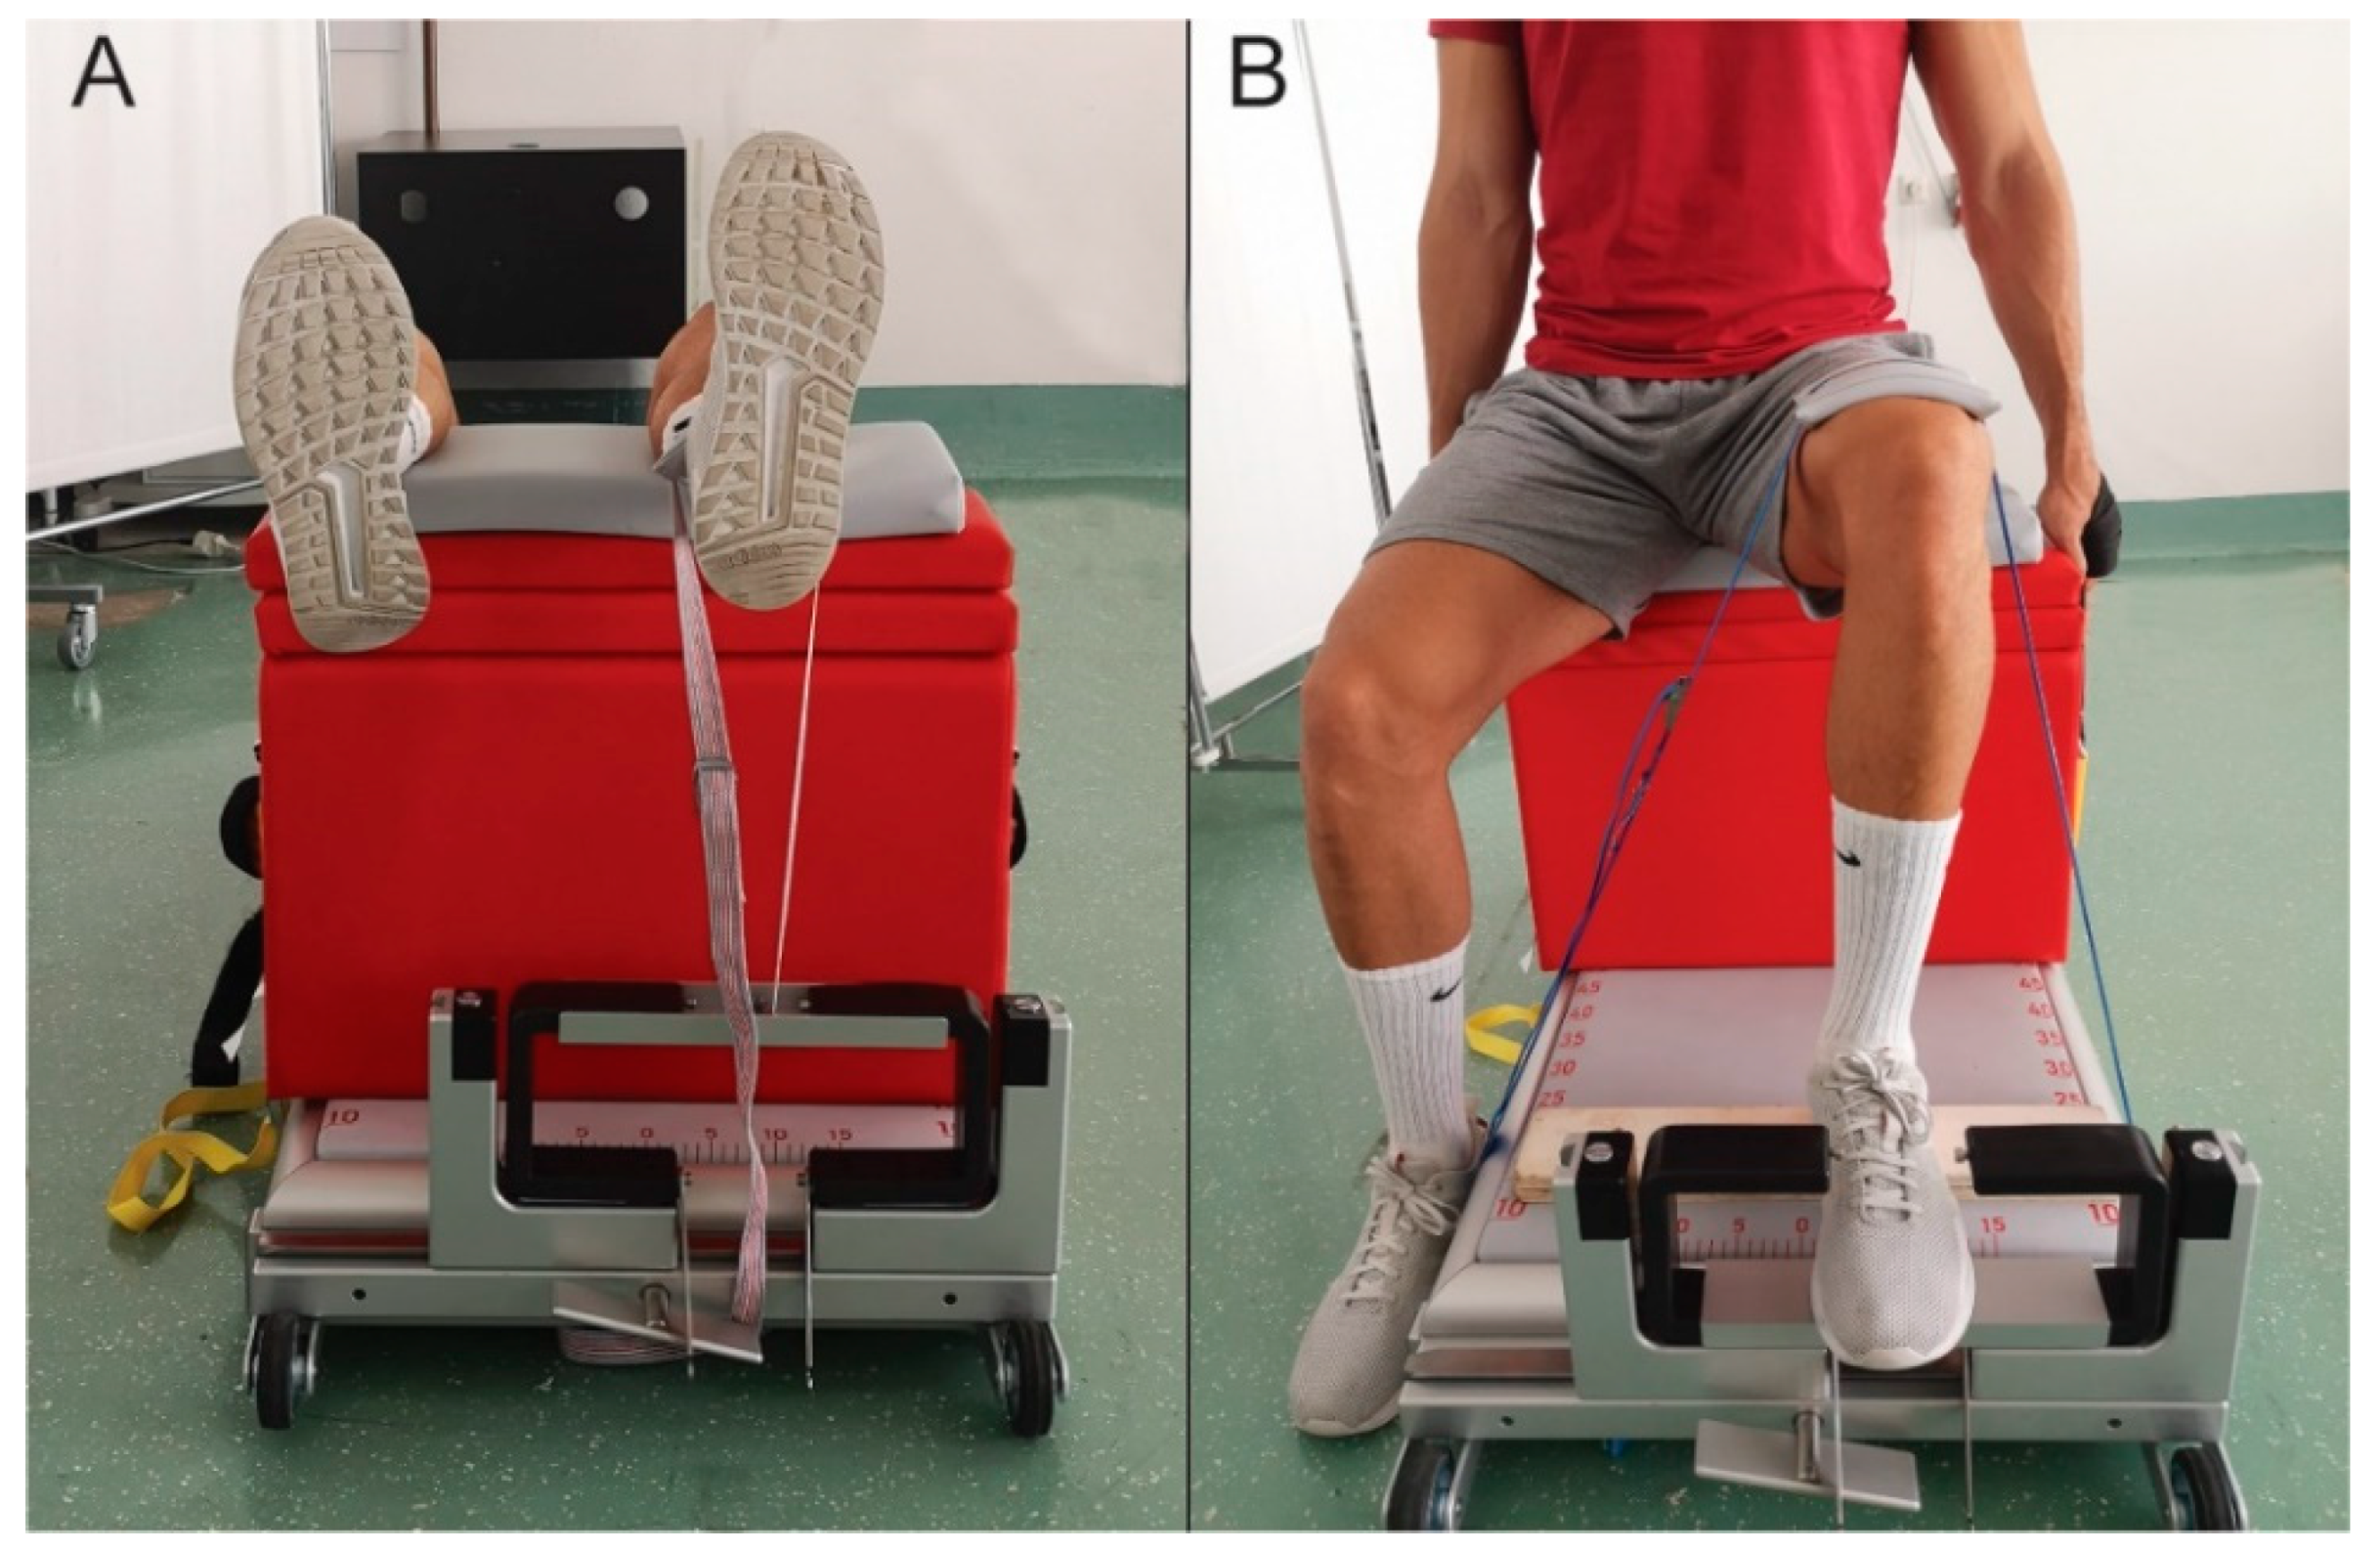 Applied Sciences | Free Full-Text | Reliability of a New Portable  Dynamometer for Assessing Hip and Lower Limb Strength | HTML